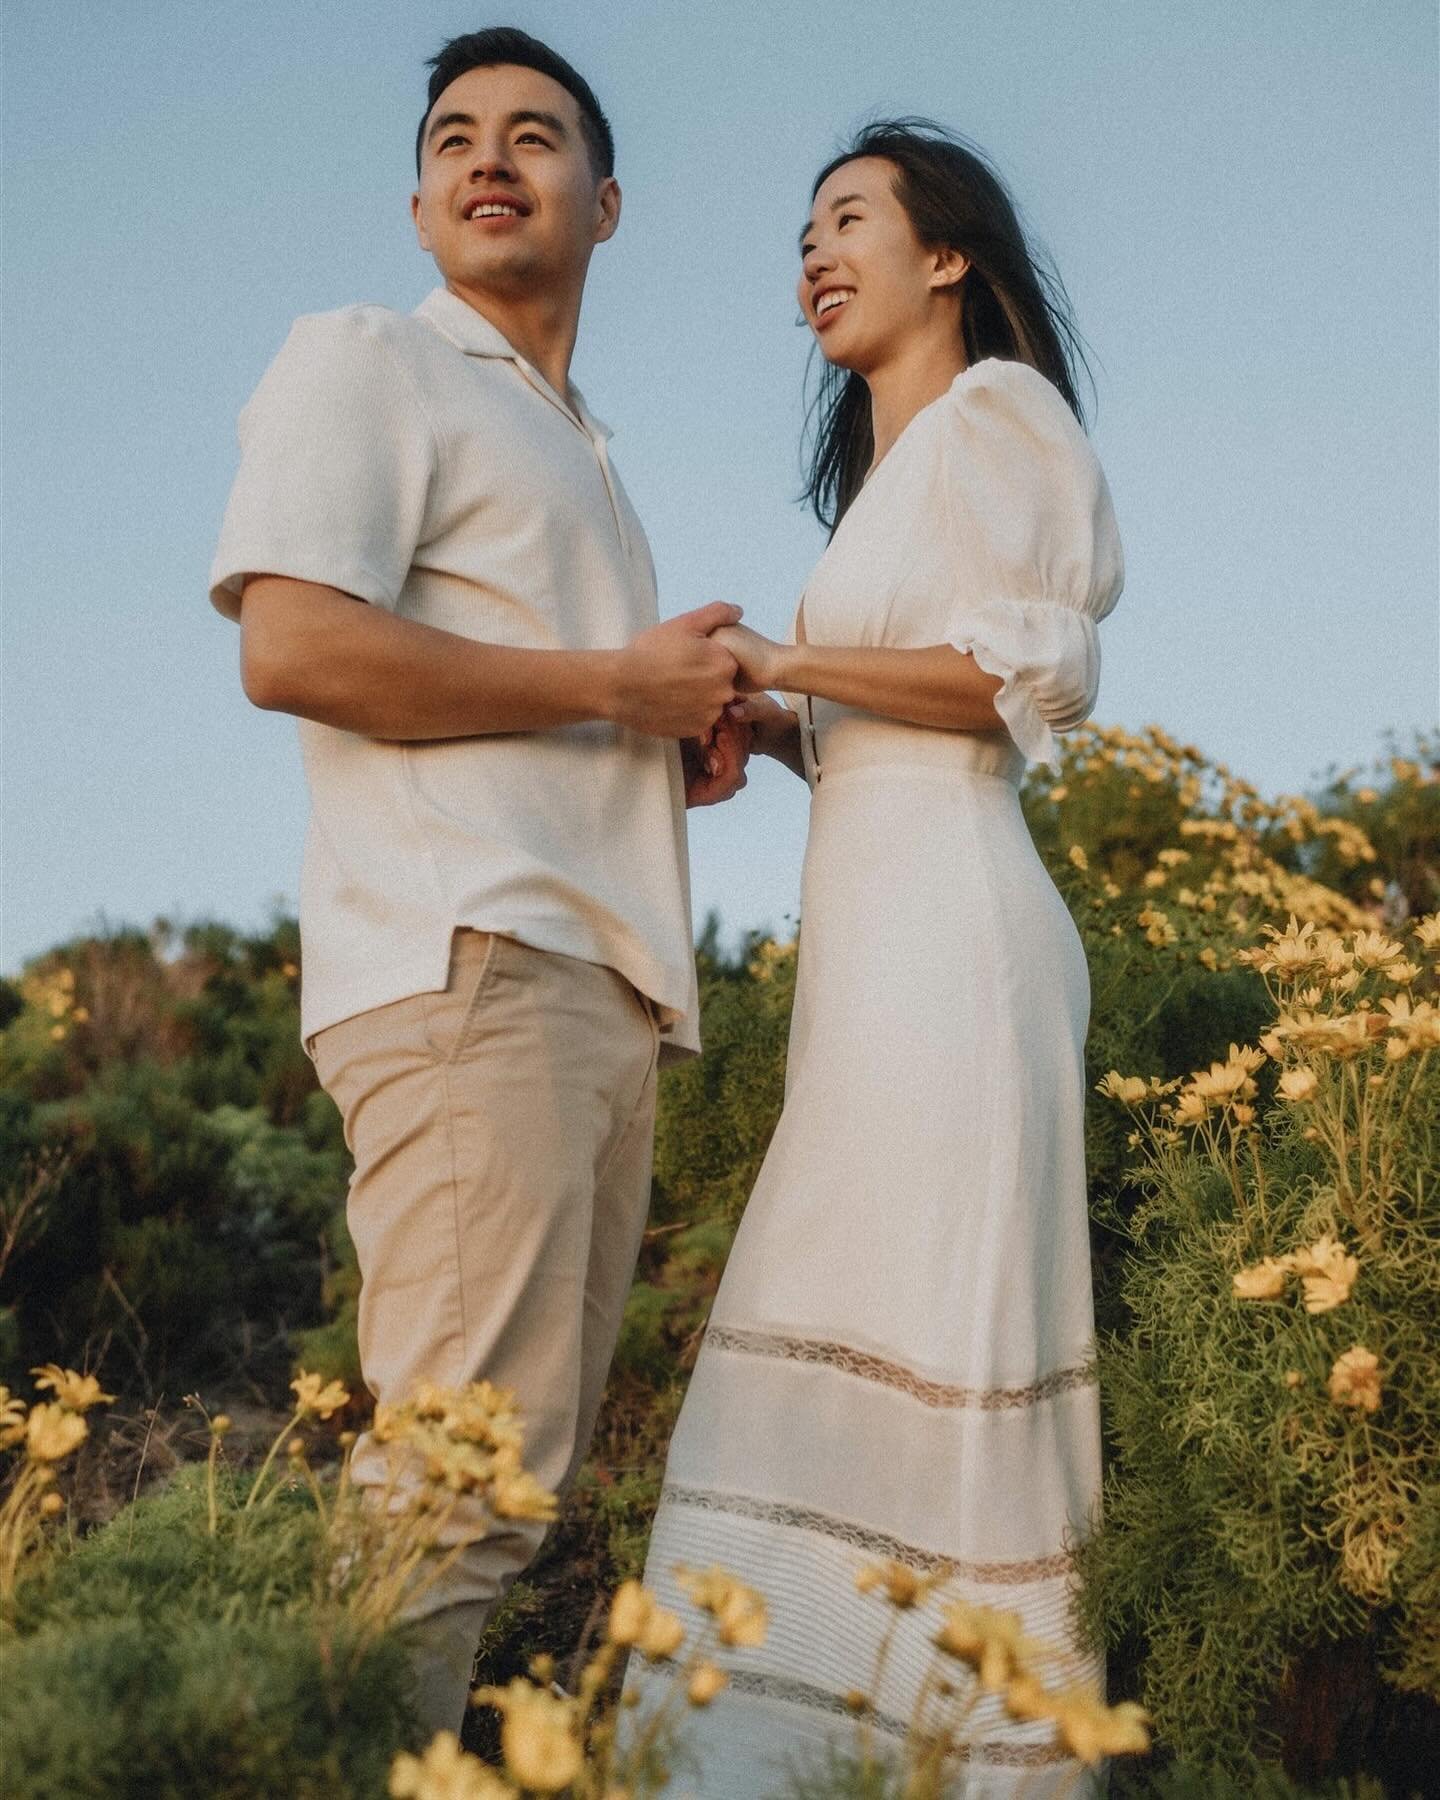 Spring engagement sessions have been so amazing and filled with stunning scenery, like this one in Malibu! These two cuties celebrated their engagement with a little stay-cation and a fun session to capture the love and excitement that comes with jus